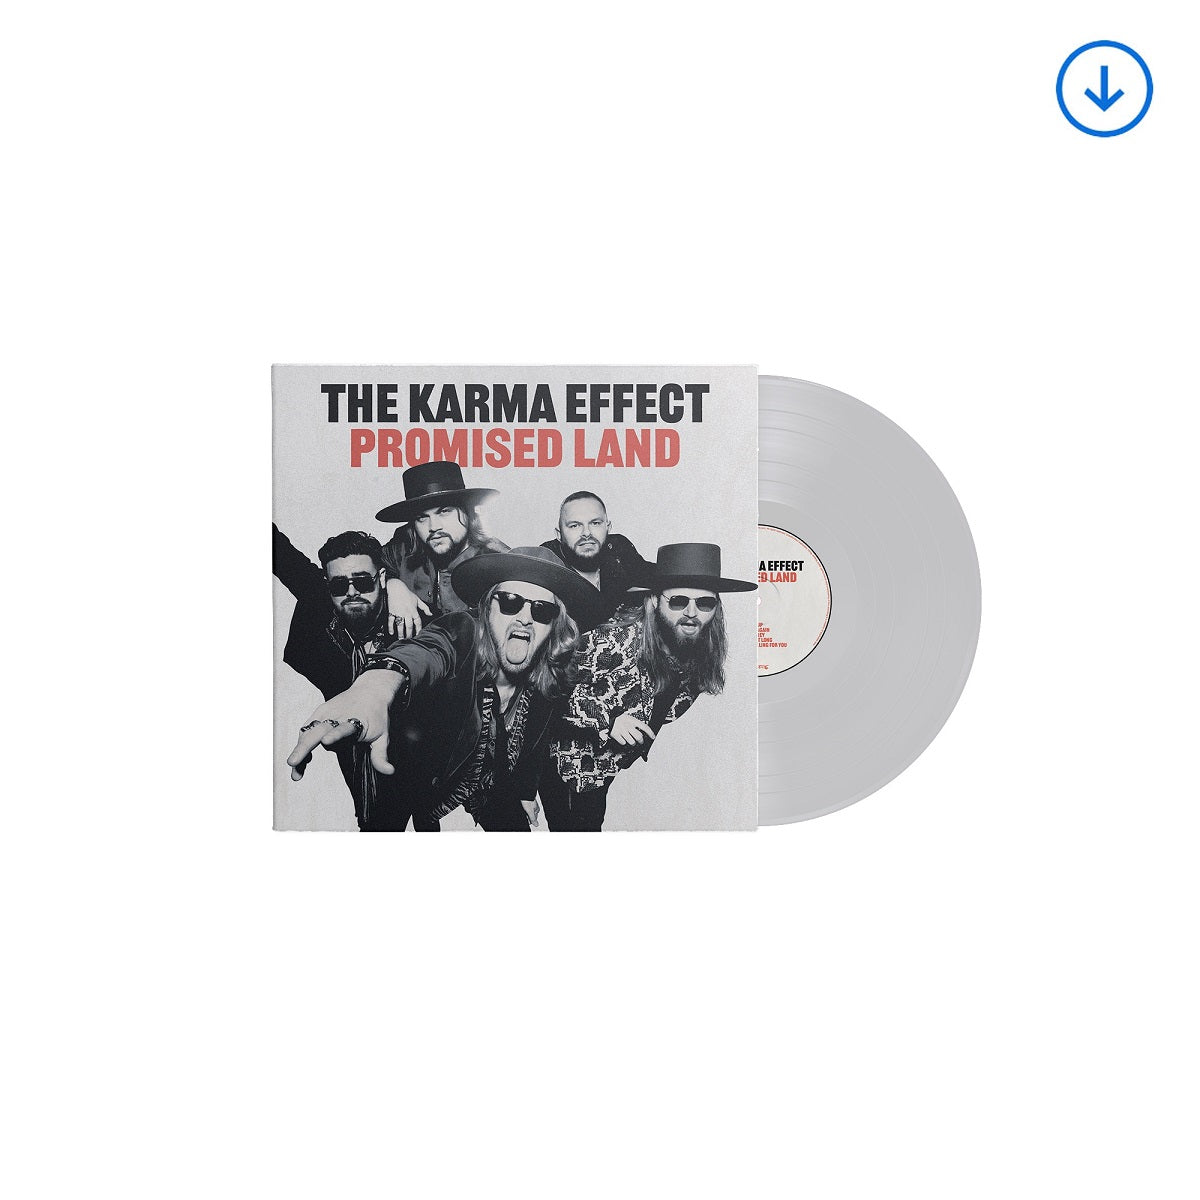 The Karma Effect "Promised Land" Clear Vinyl inc. Download (Ltd to 300 copies)